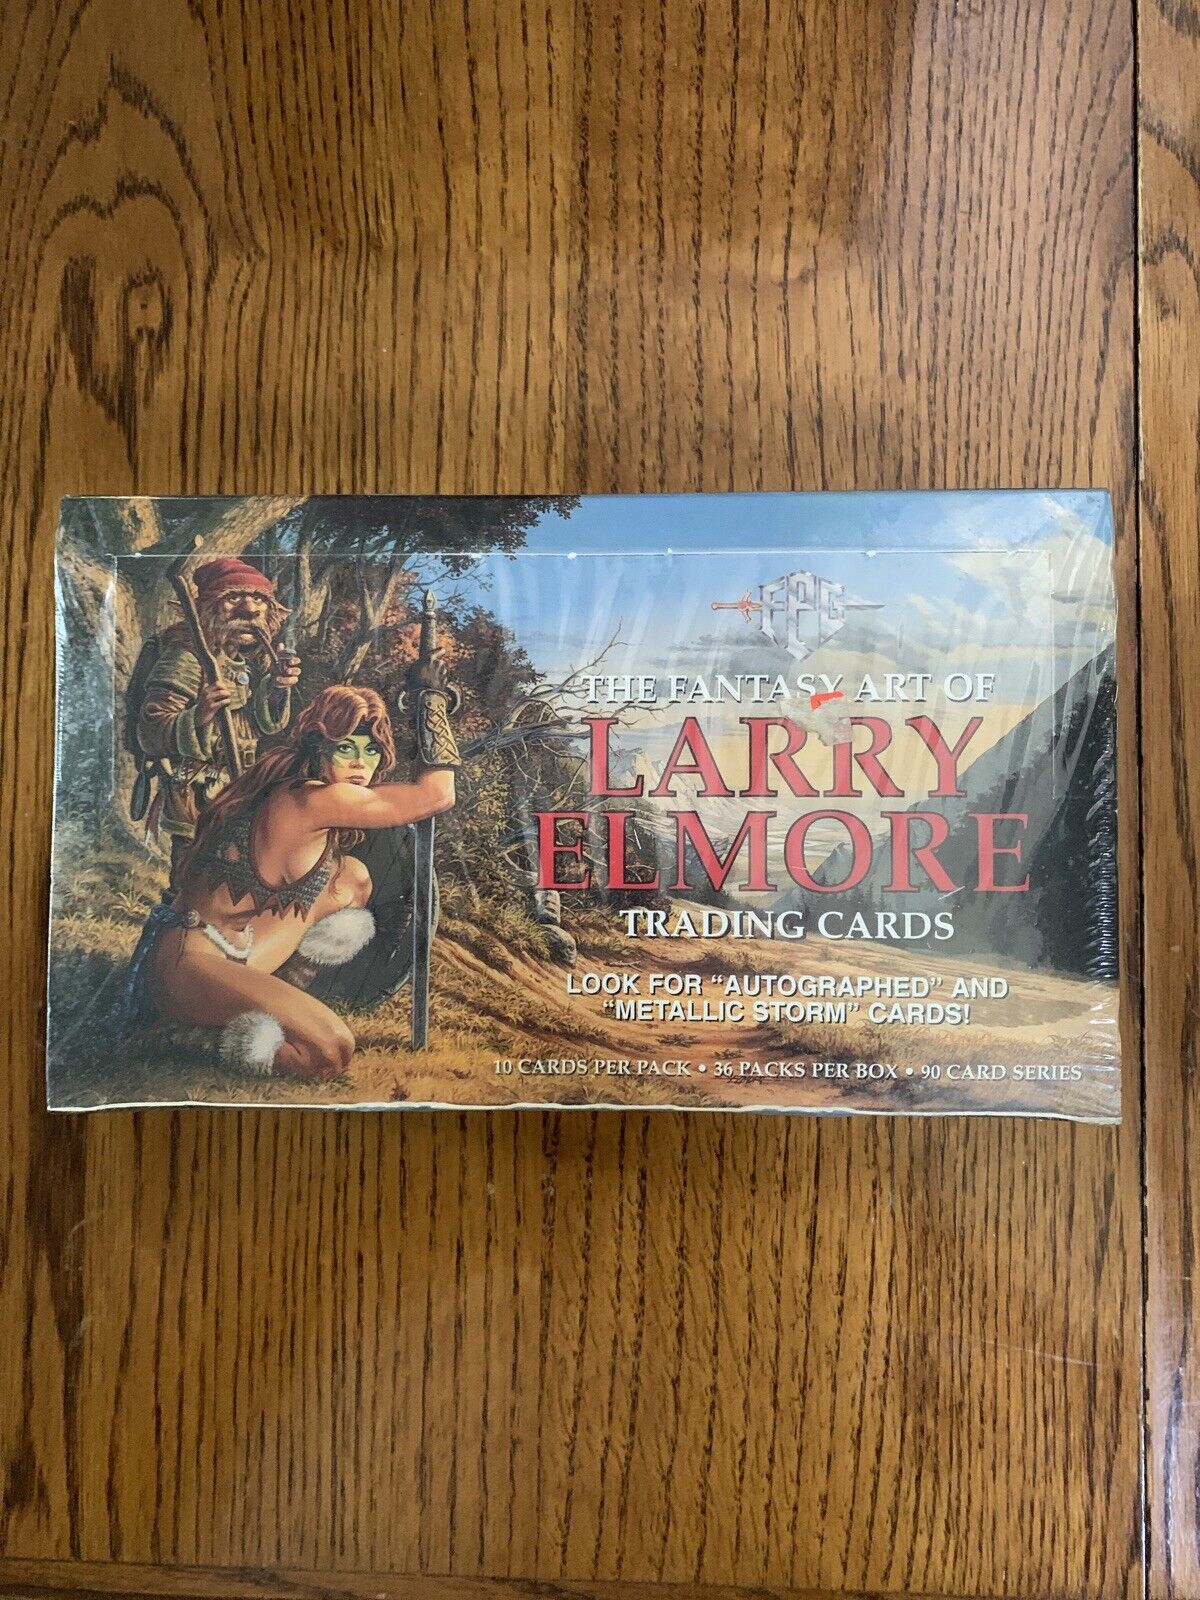 1994 Larry Elmore Fantasy Art trading card factory sealed box Dungeons & Dragons